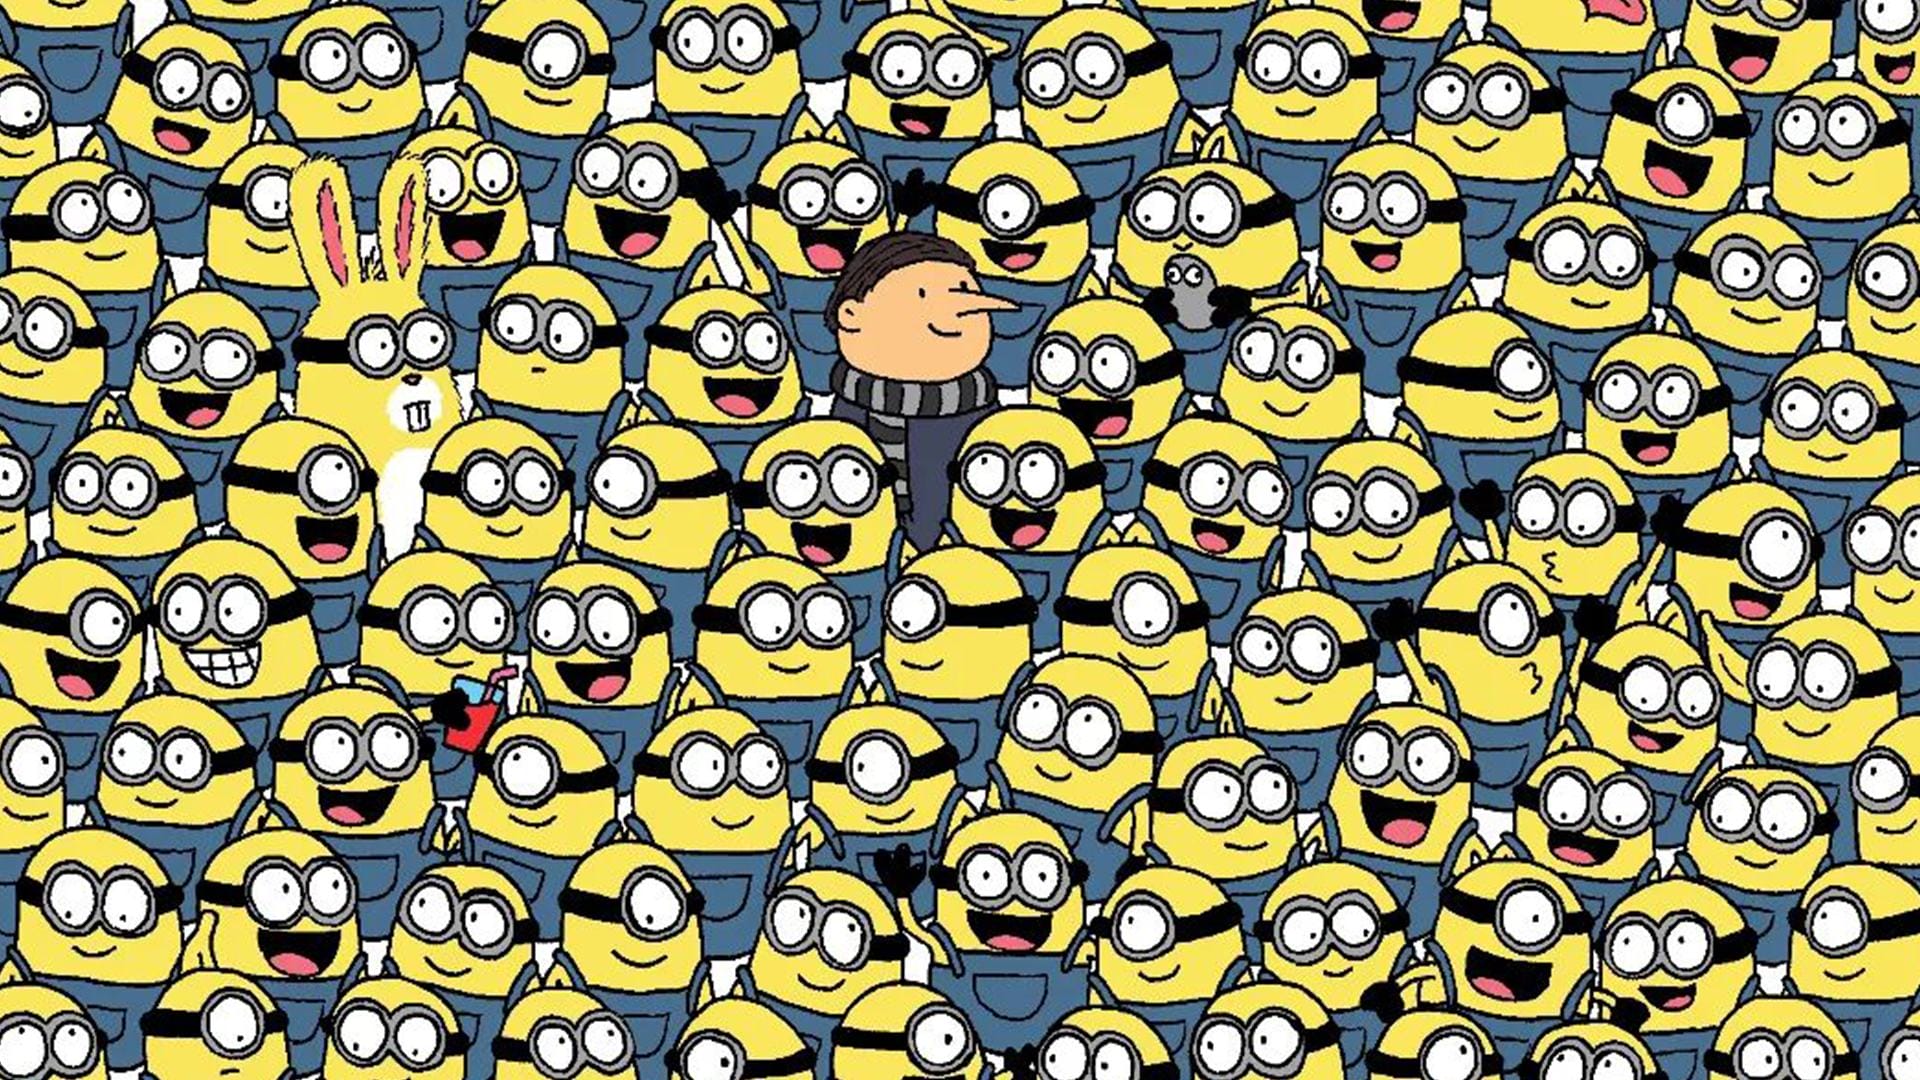 Can you find three pieces of fruit among the Minions? It might send you bananas